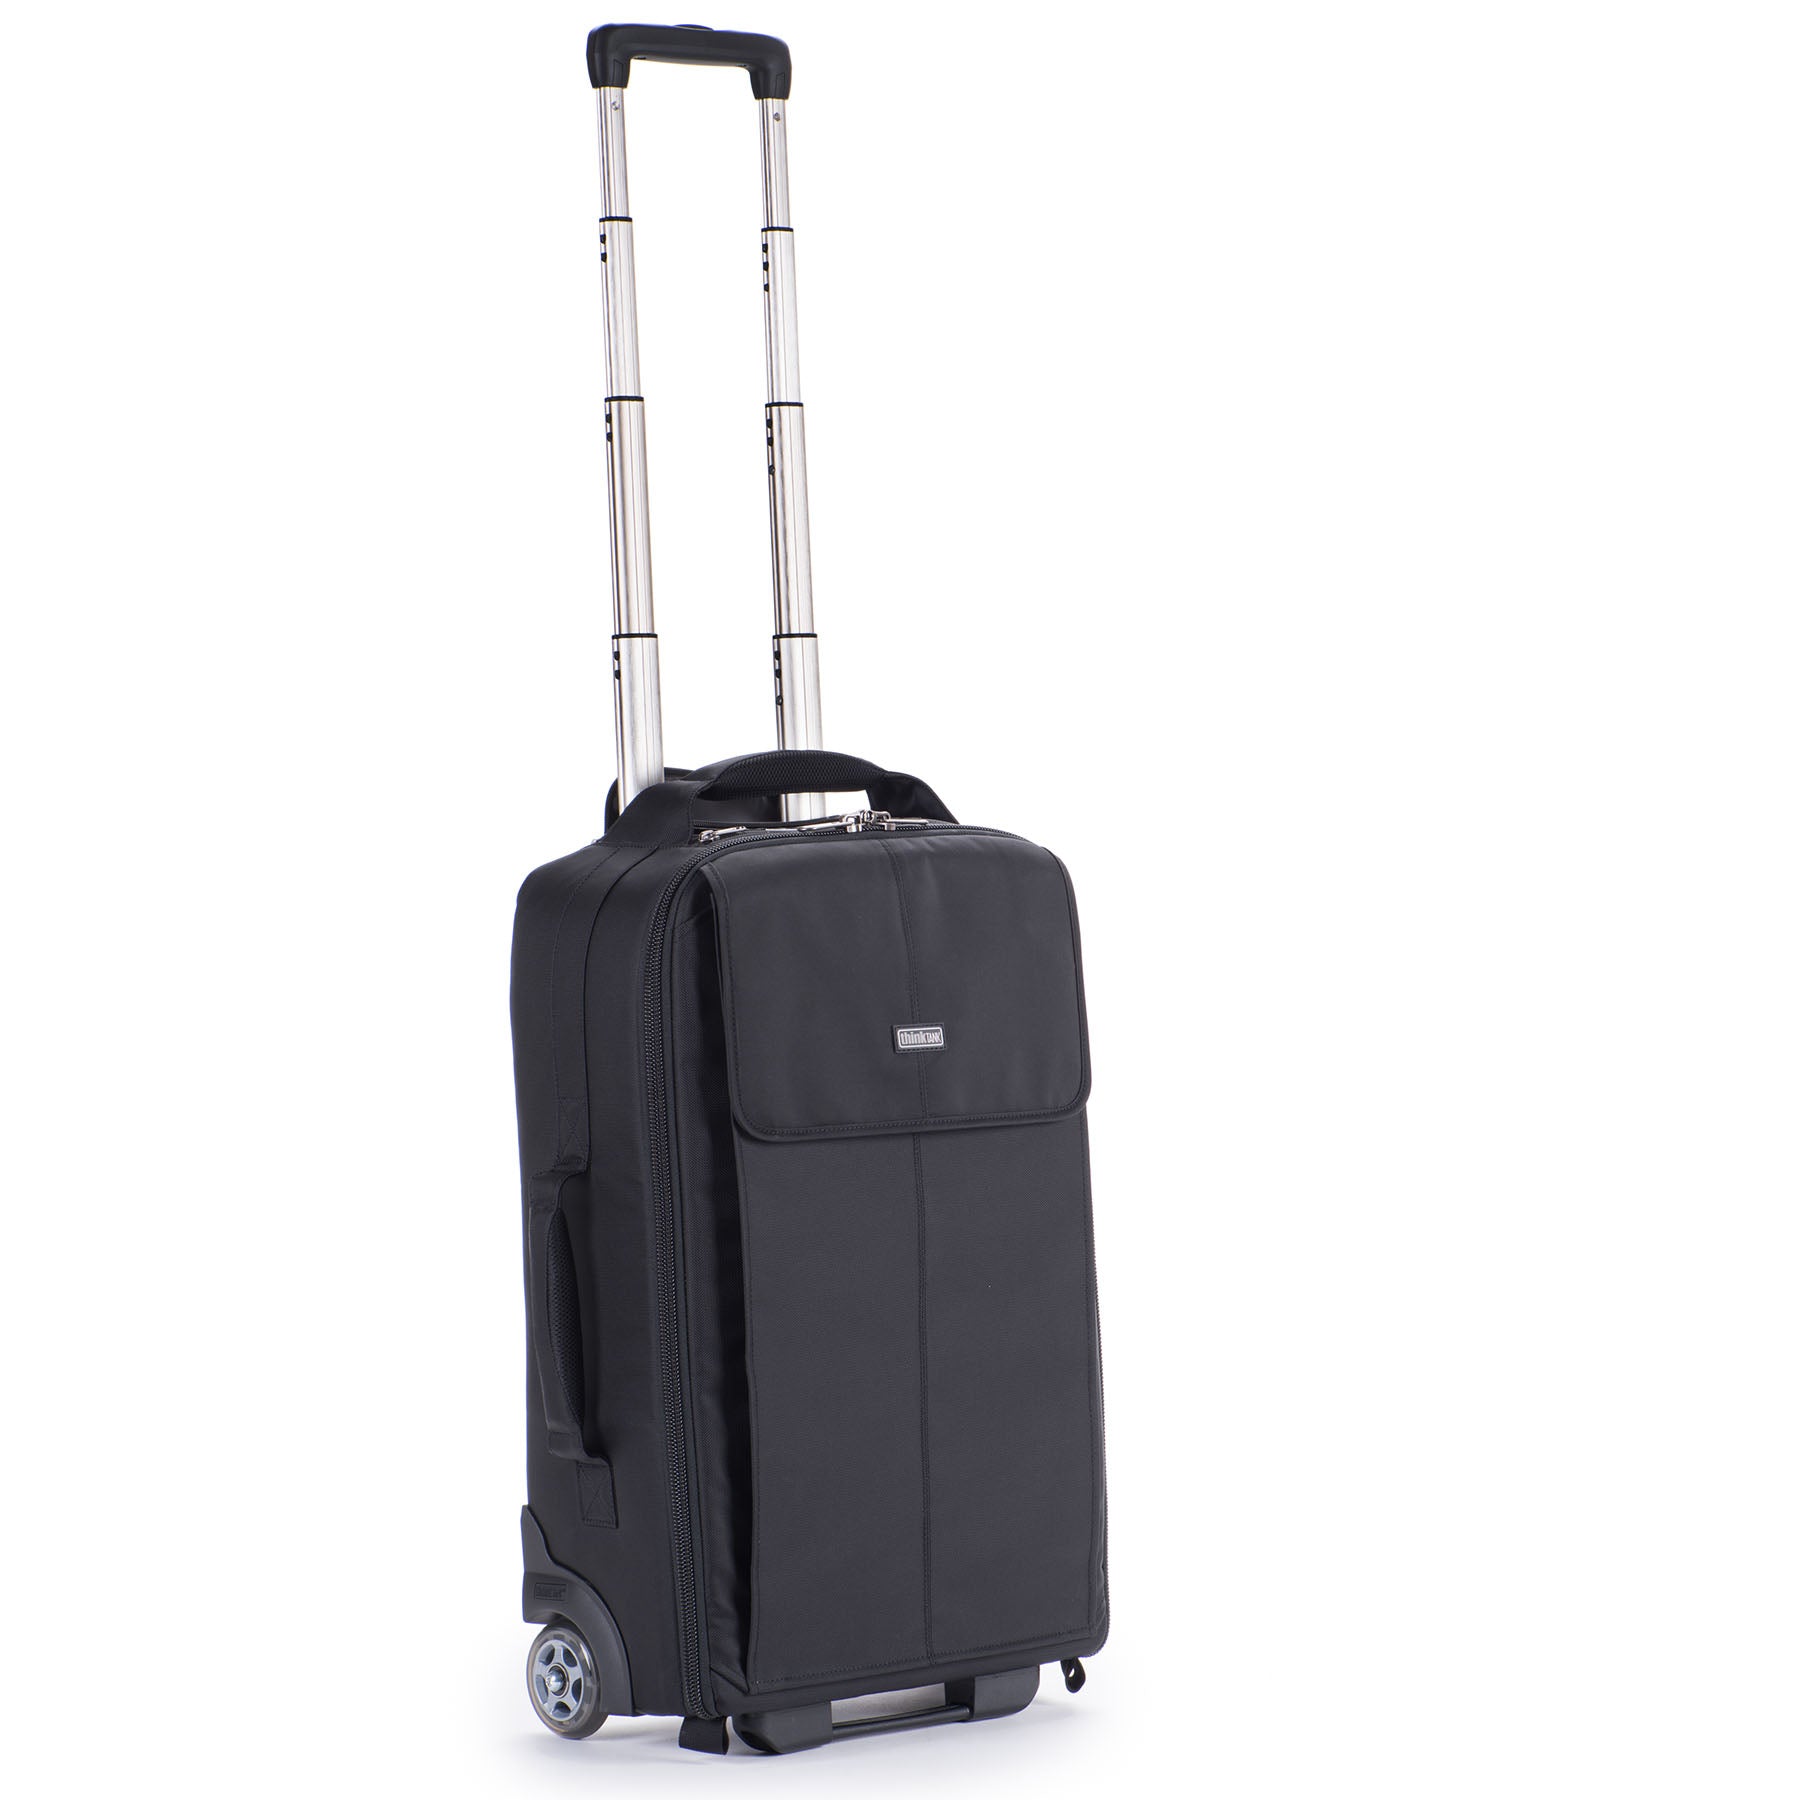 Airport Advantage Plus Rolling Camera Bags for Airlines • Think Tank Photo